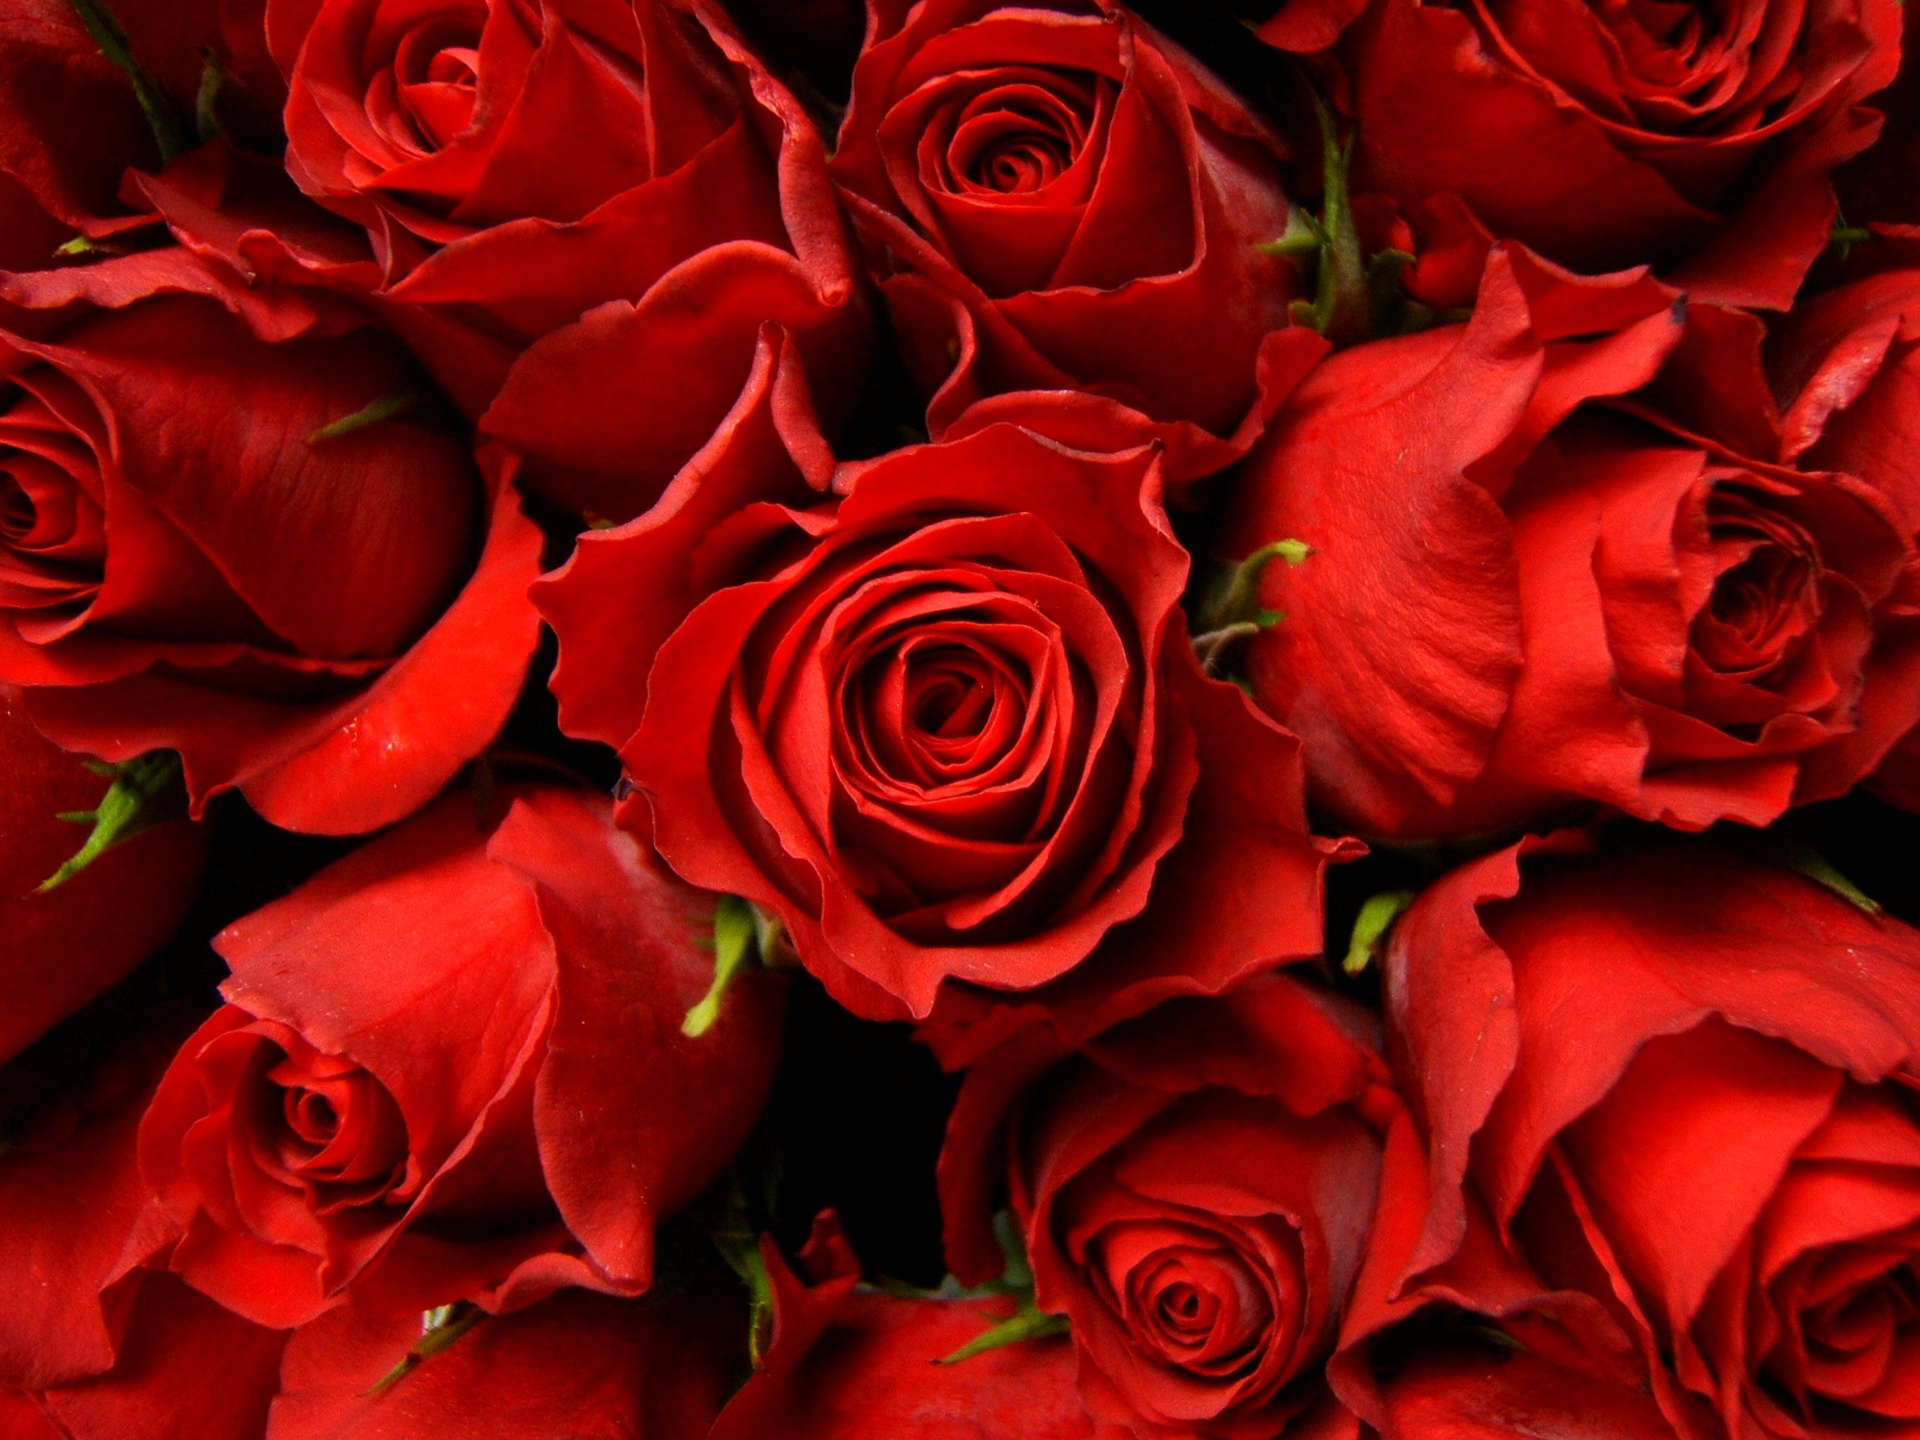 Red Roses Picture - Wallpaper, High Definition, High Quality, Widescreen